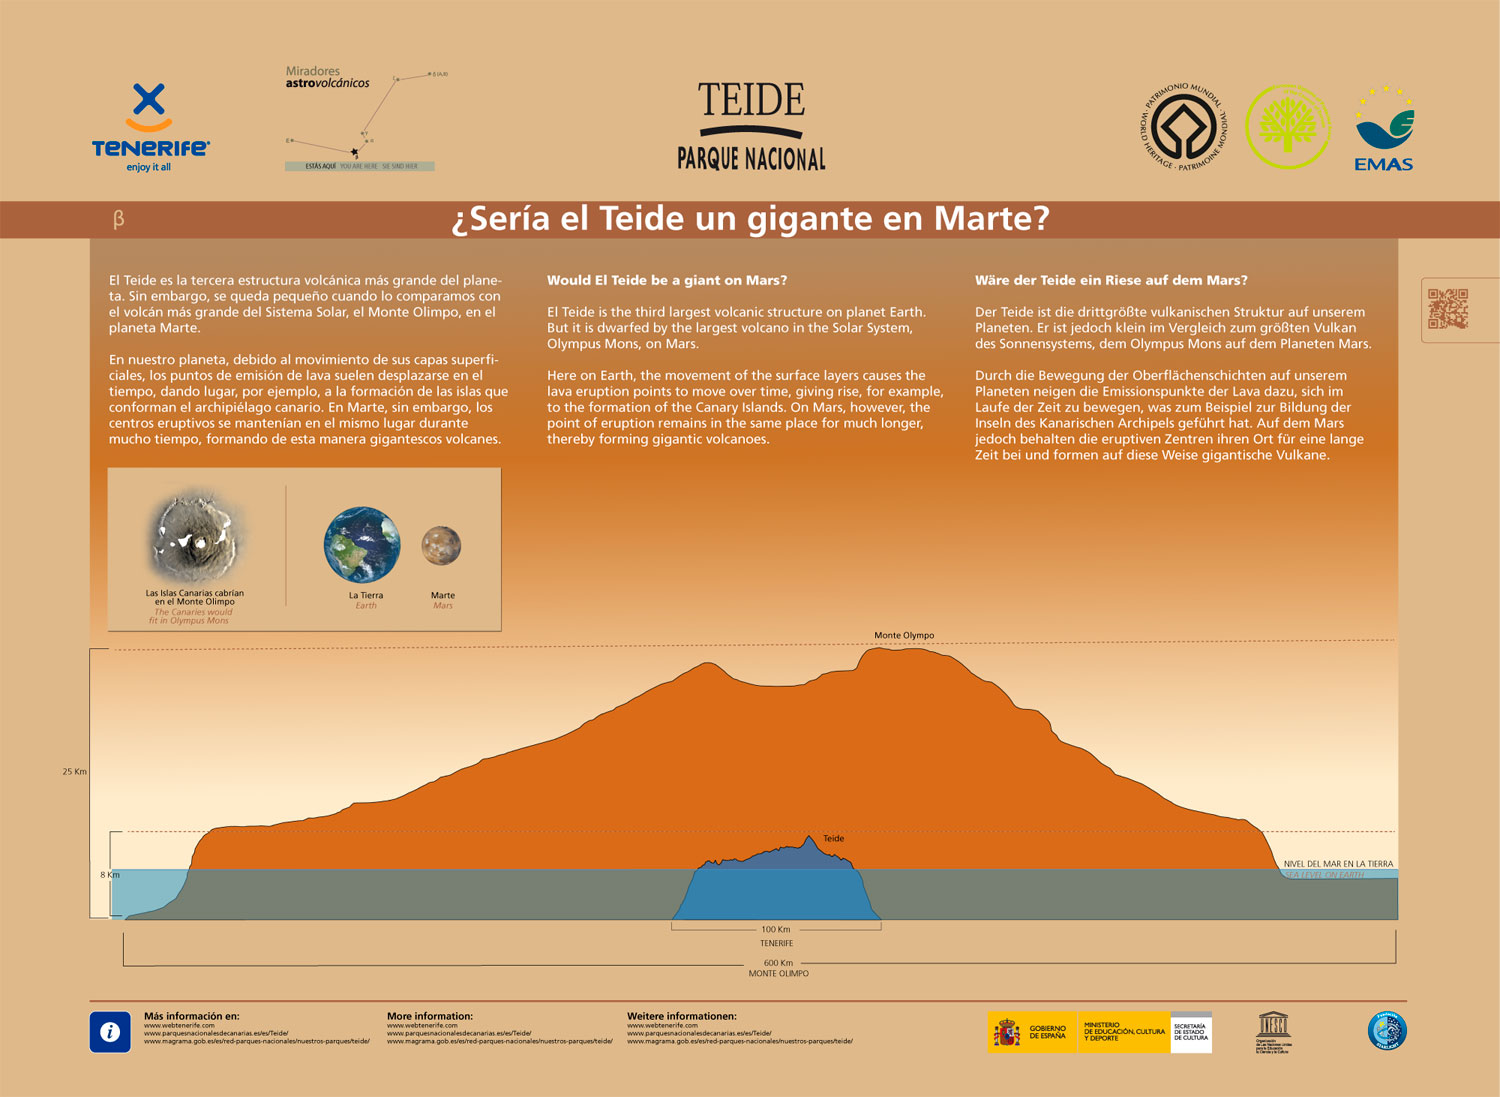 Would the Teide be a giant on Mars?